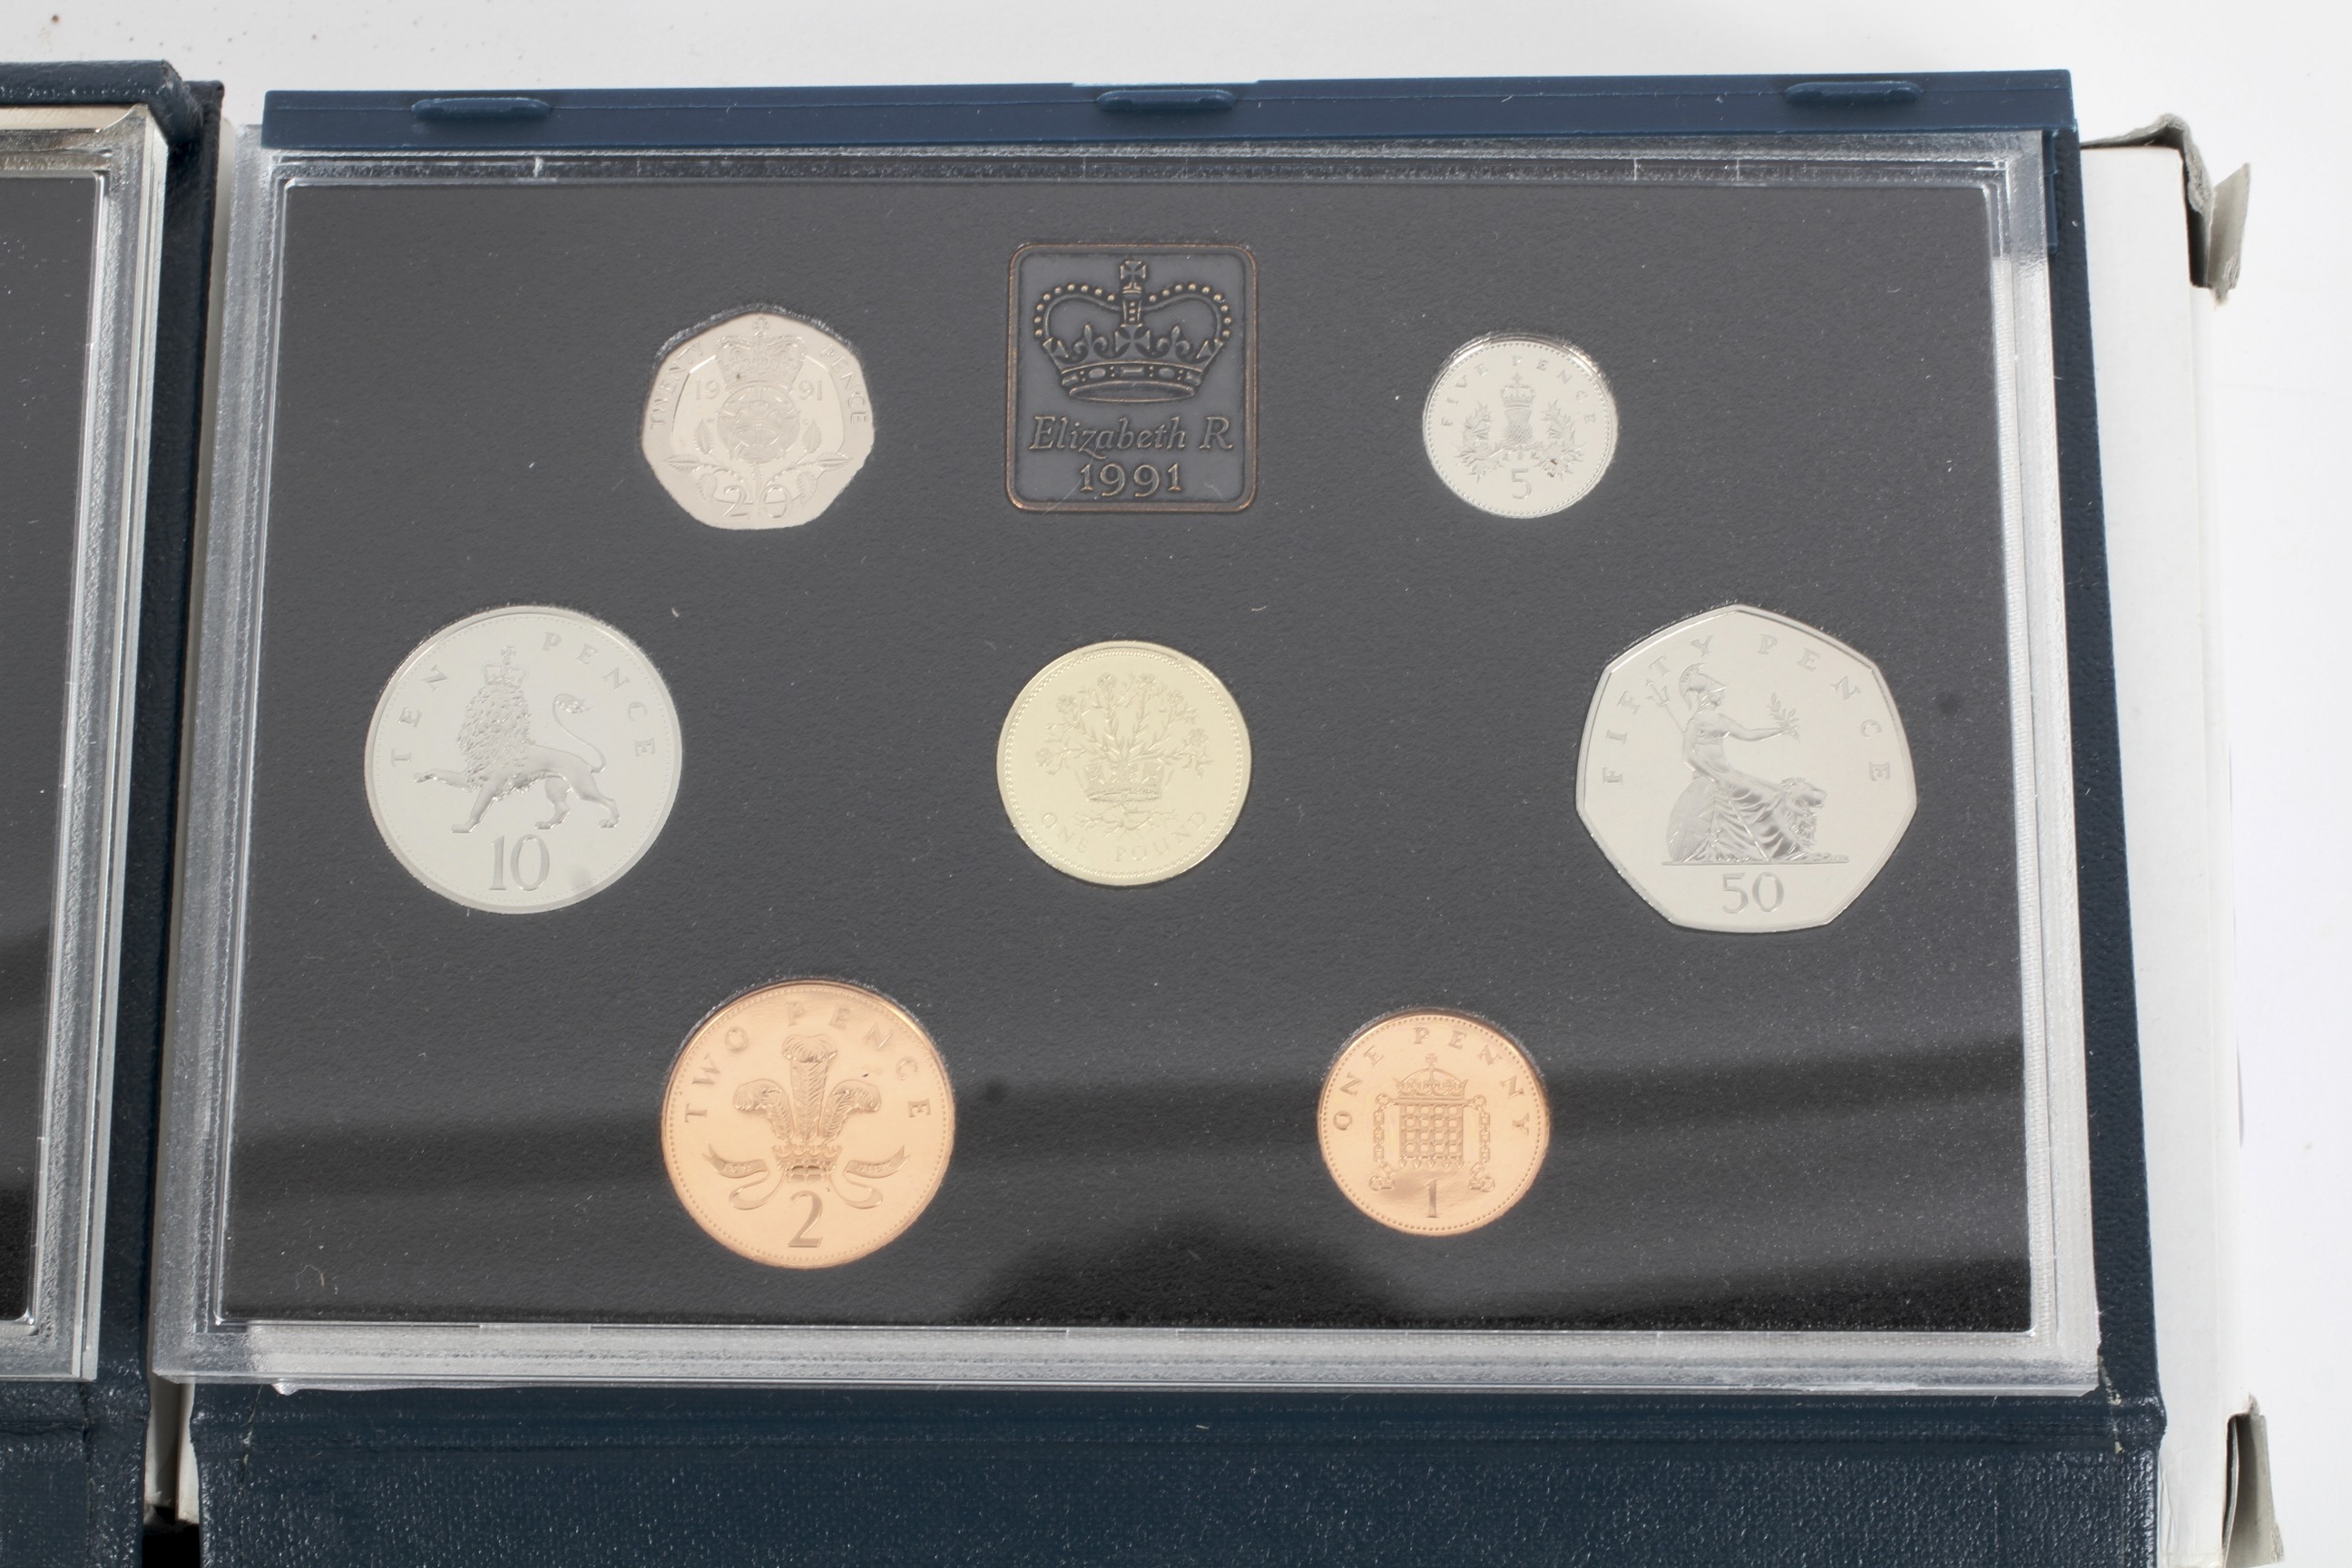 Three Royal Mint proof coin collections, for the years 1989, 1990, 1991. - Image 4 of 4